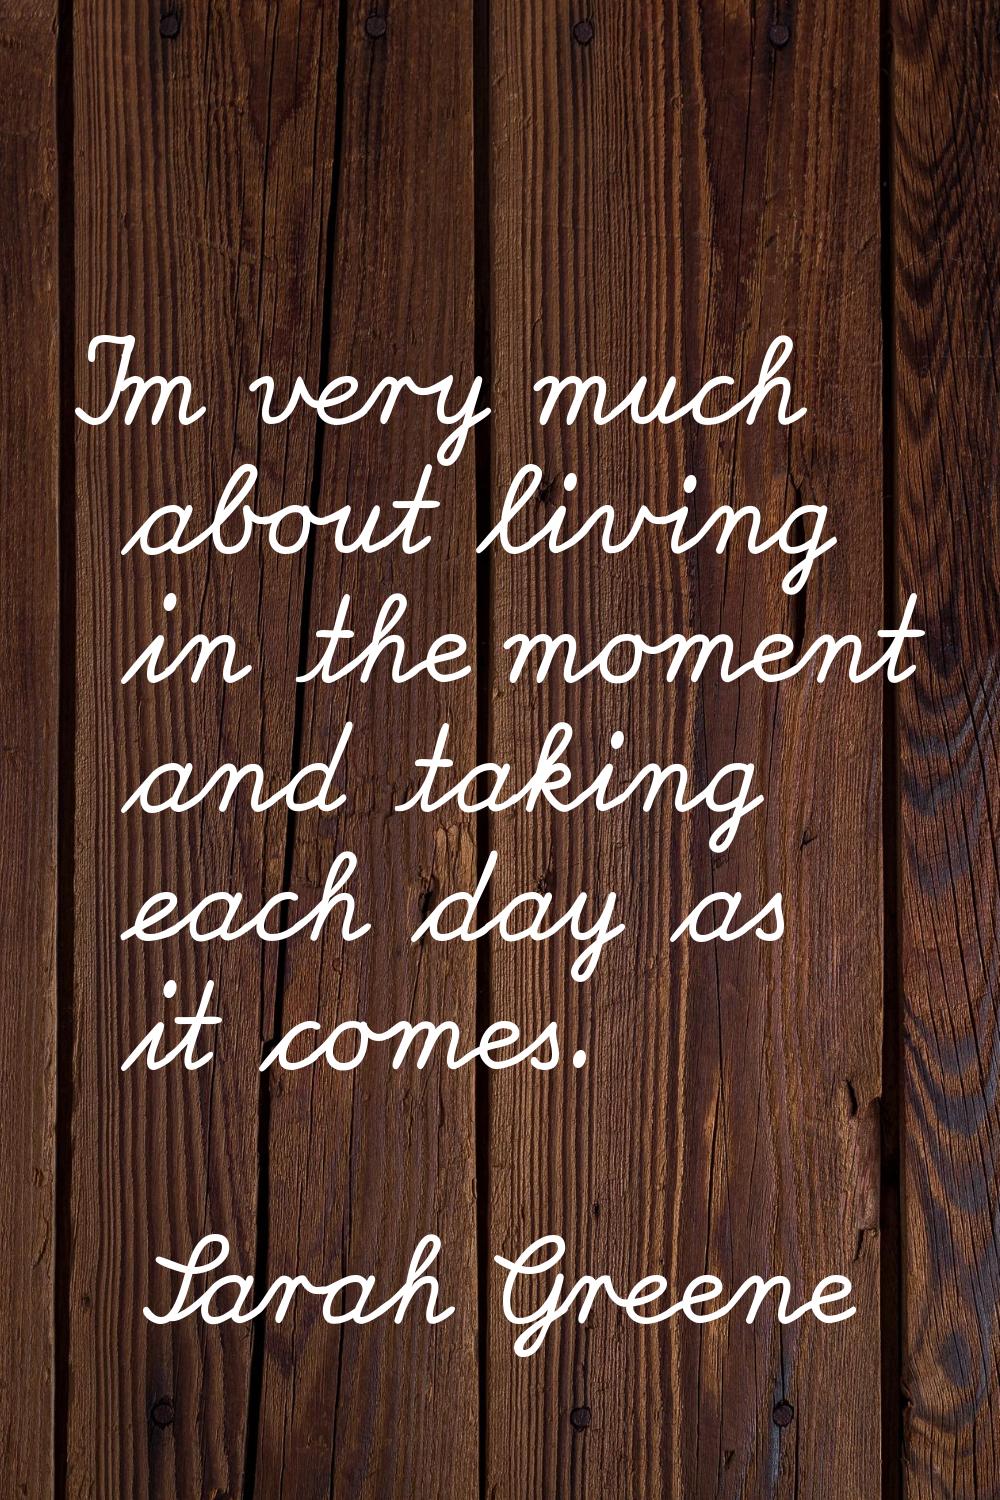 I'm very much about living in the moment and taking each day as it comes.